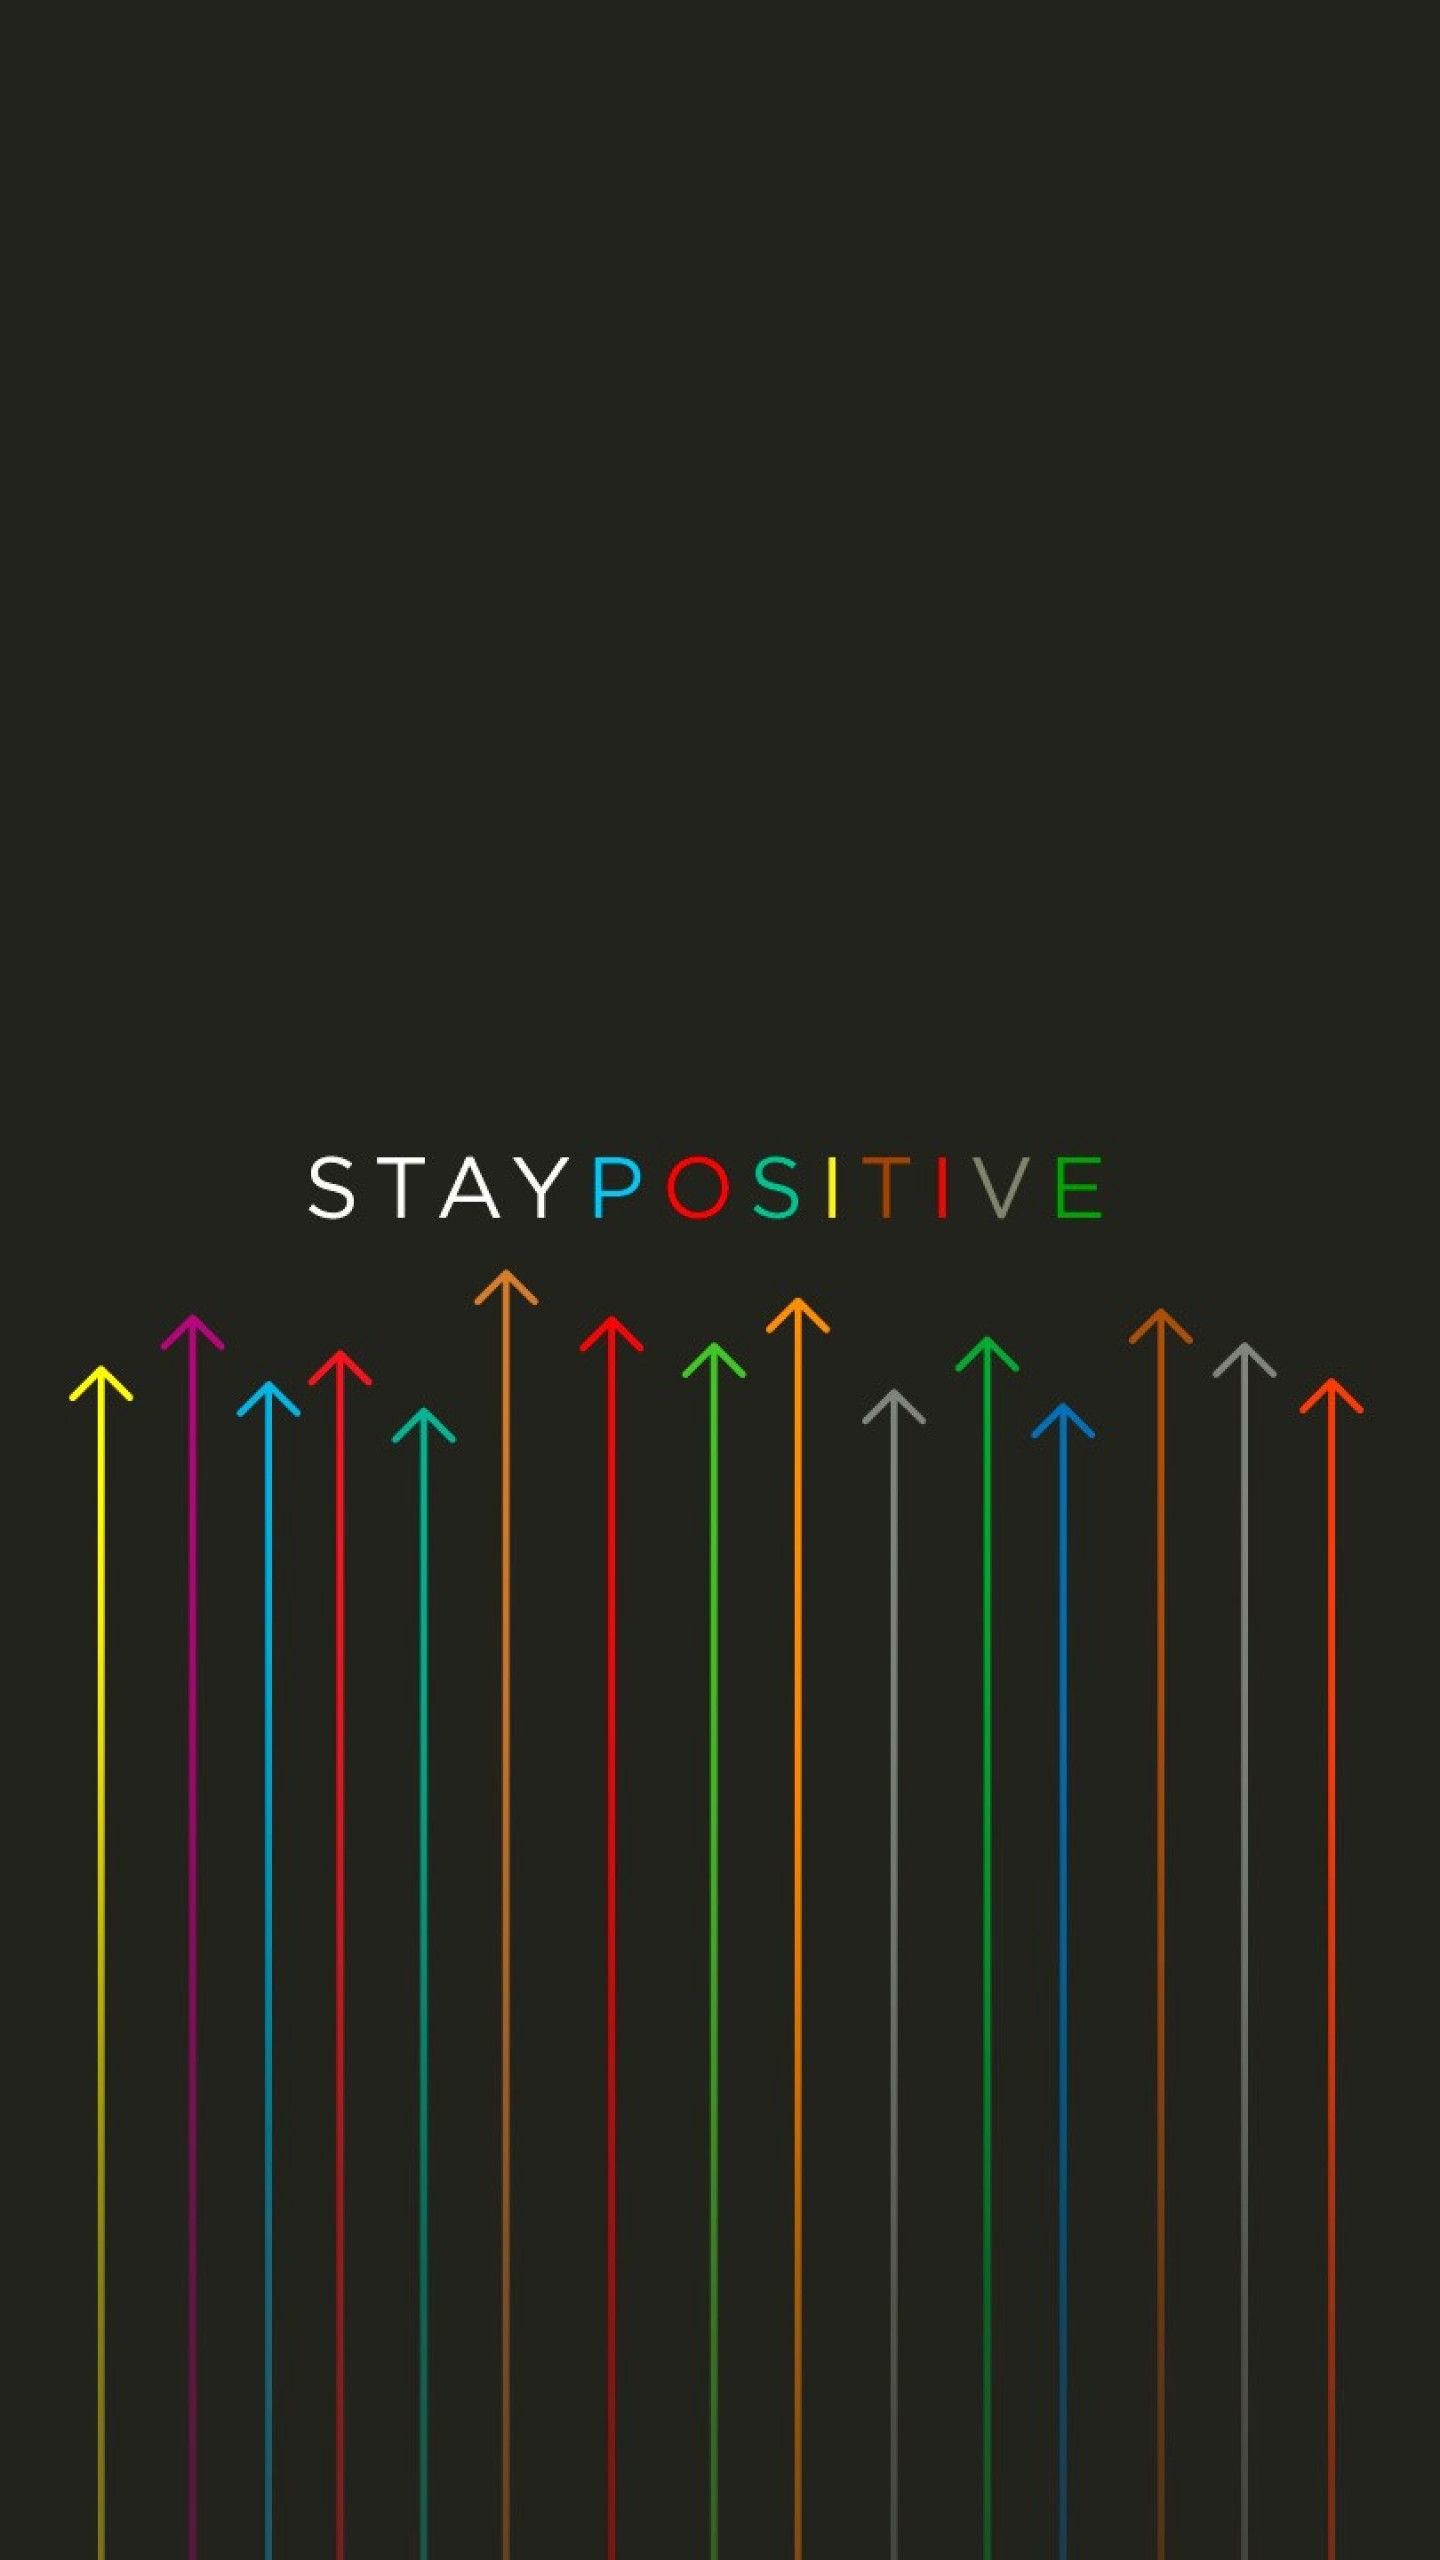 Positive Wallpapers on WallpaperDog